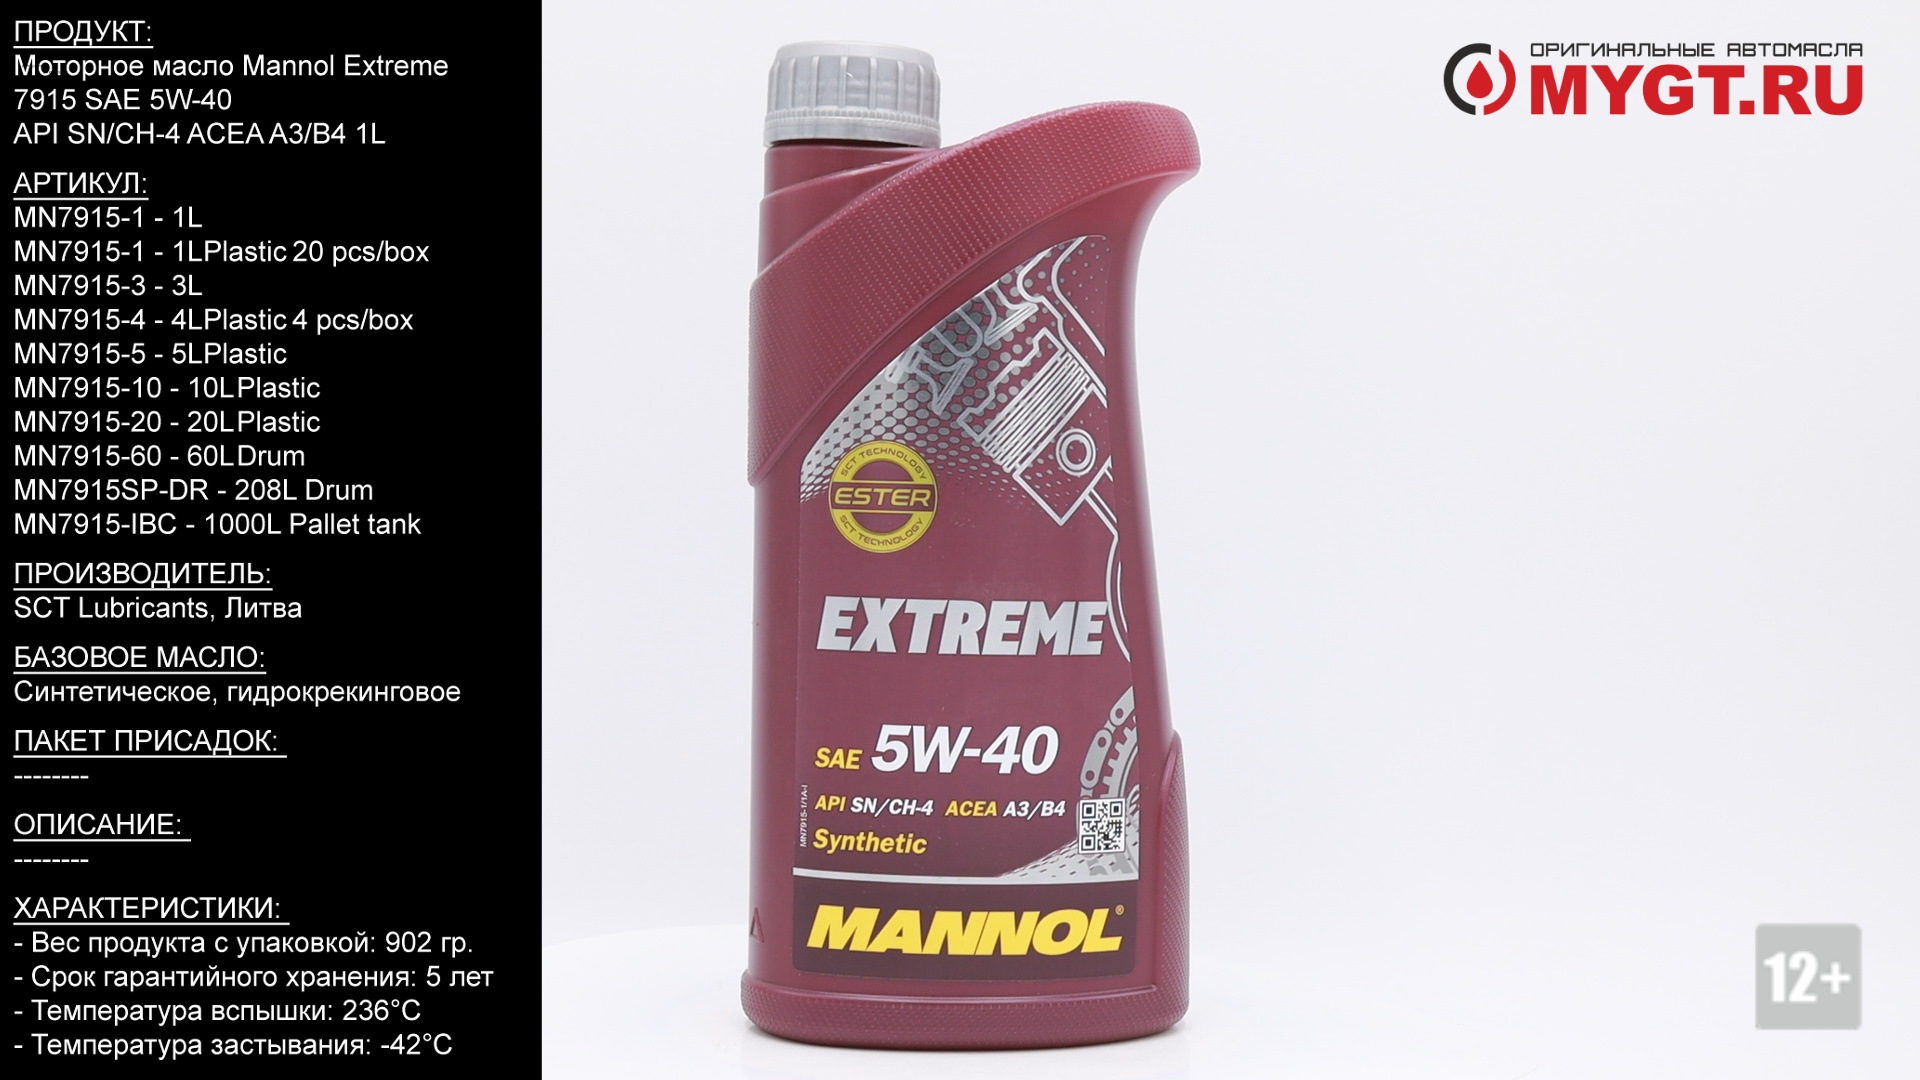 Маннол масло 5w40. 7915 Mannol extreme 5w40 1 л.. Mannol extreme 5w-40. Масло Mannol Elite 5w40. Масло Манол 7915.